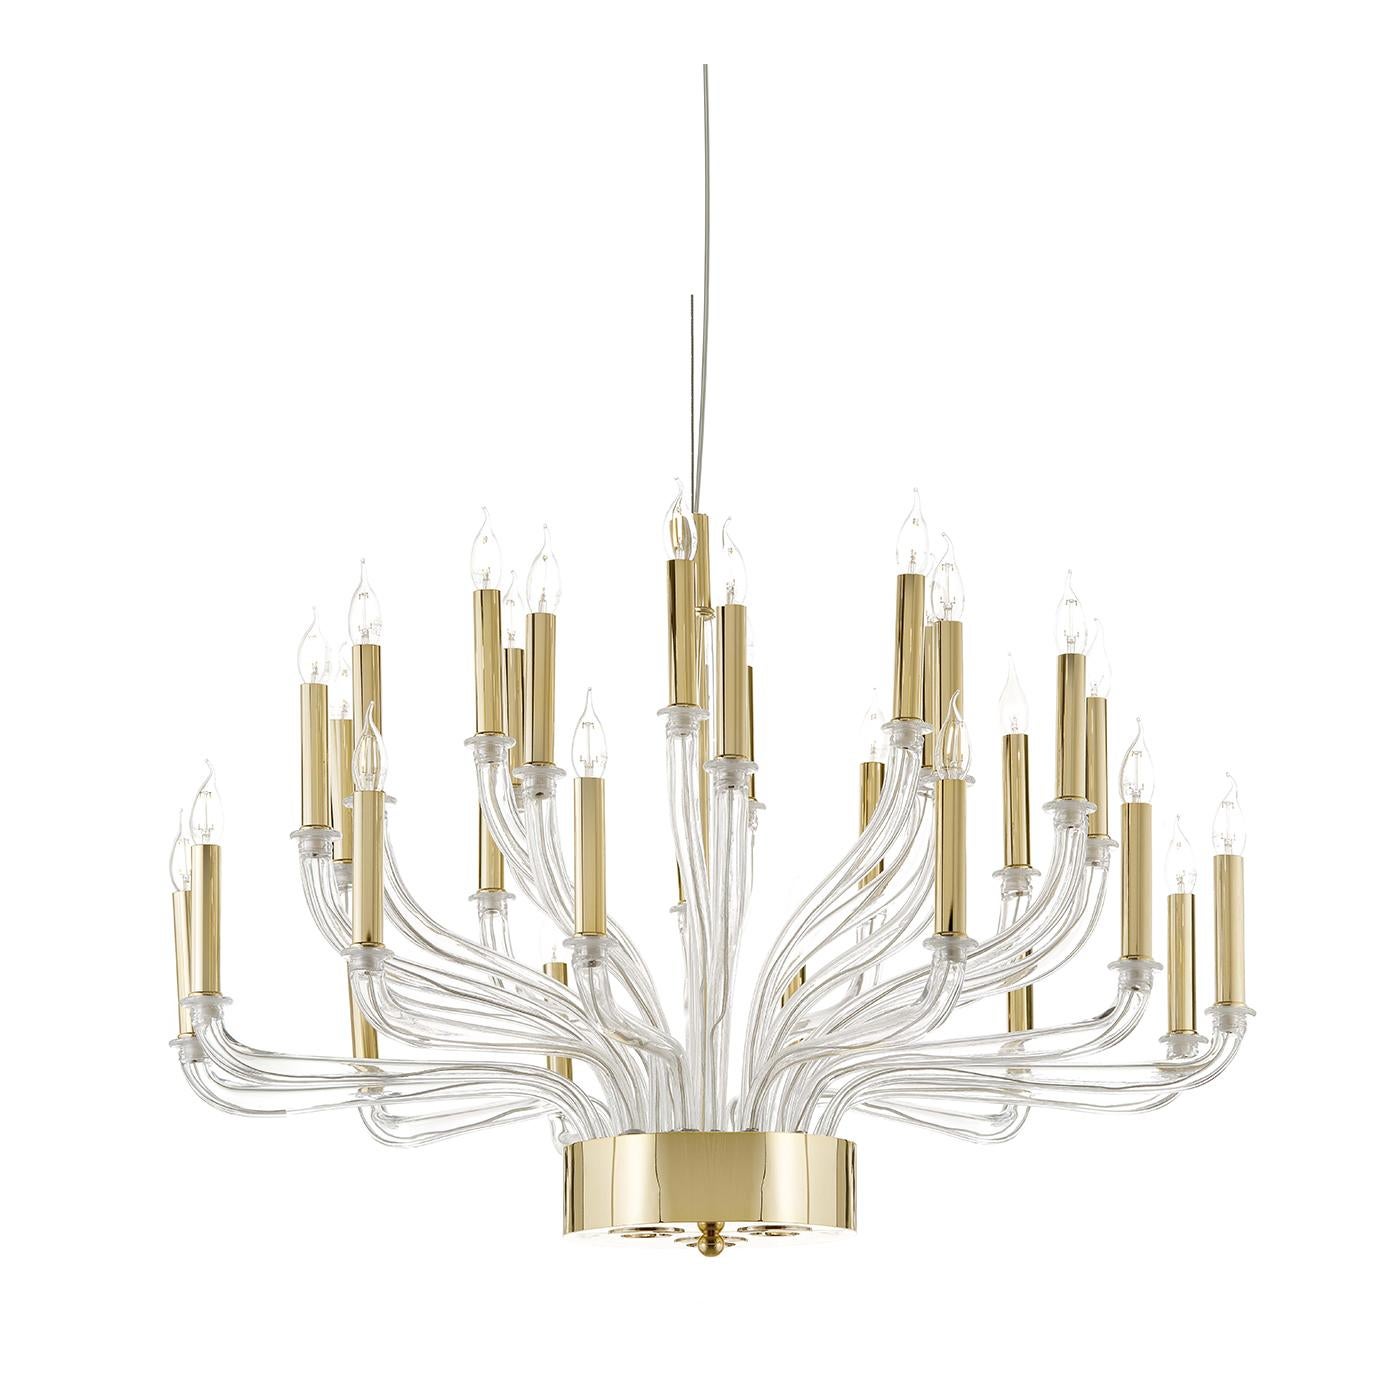 This sumptuous chandelier mixes traditional and noble materials with a modern design, combining sinuous curves in transparent Venetian mouth-blown glass with vertical elements in brushed brass that support the 30 E14 x 5W LED + three GU 10 x 10W LED